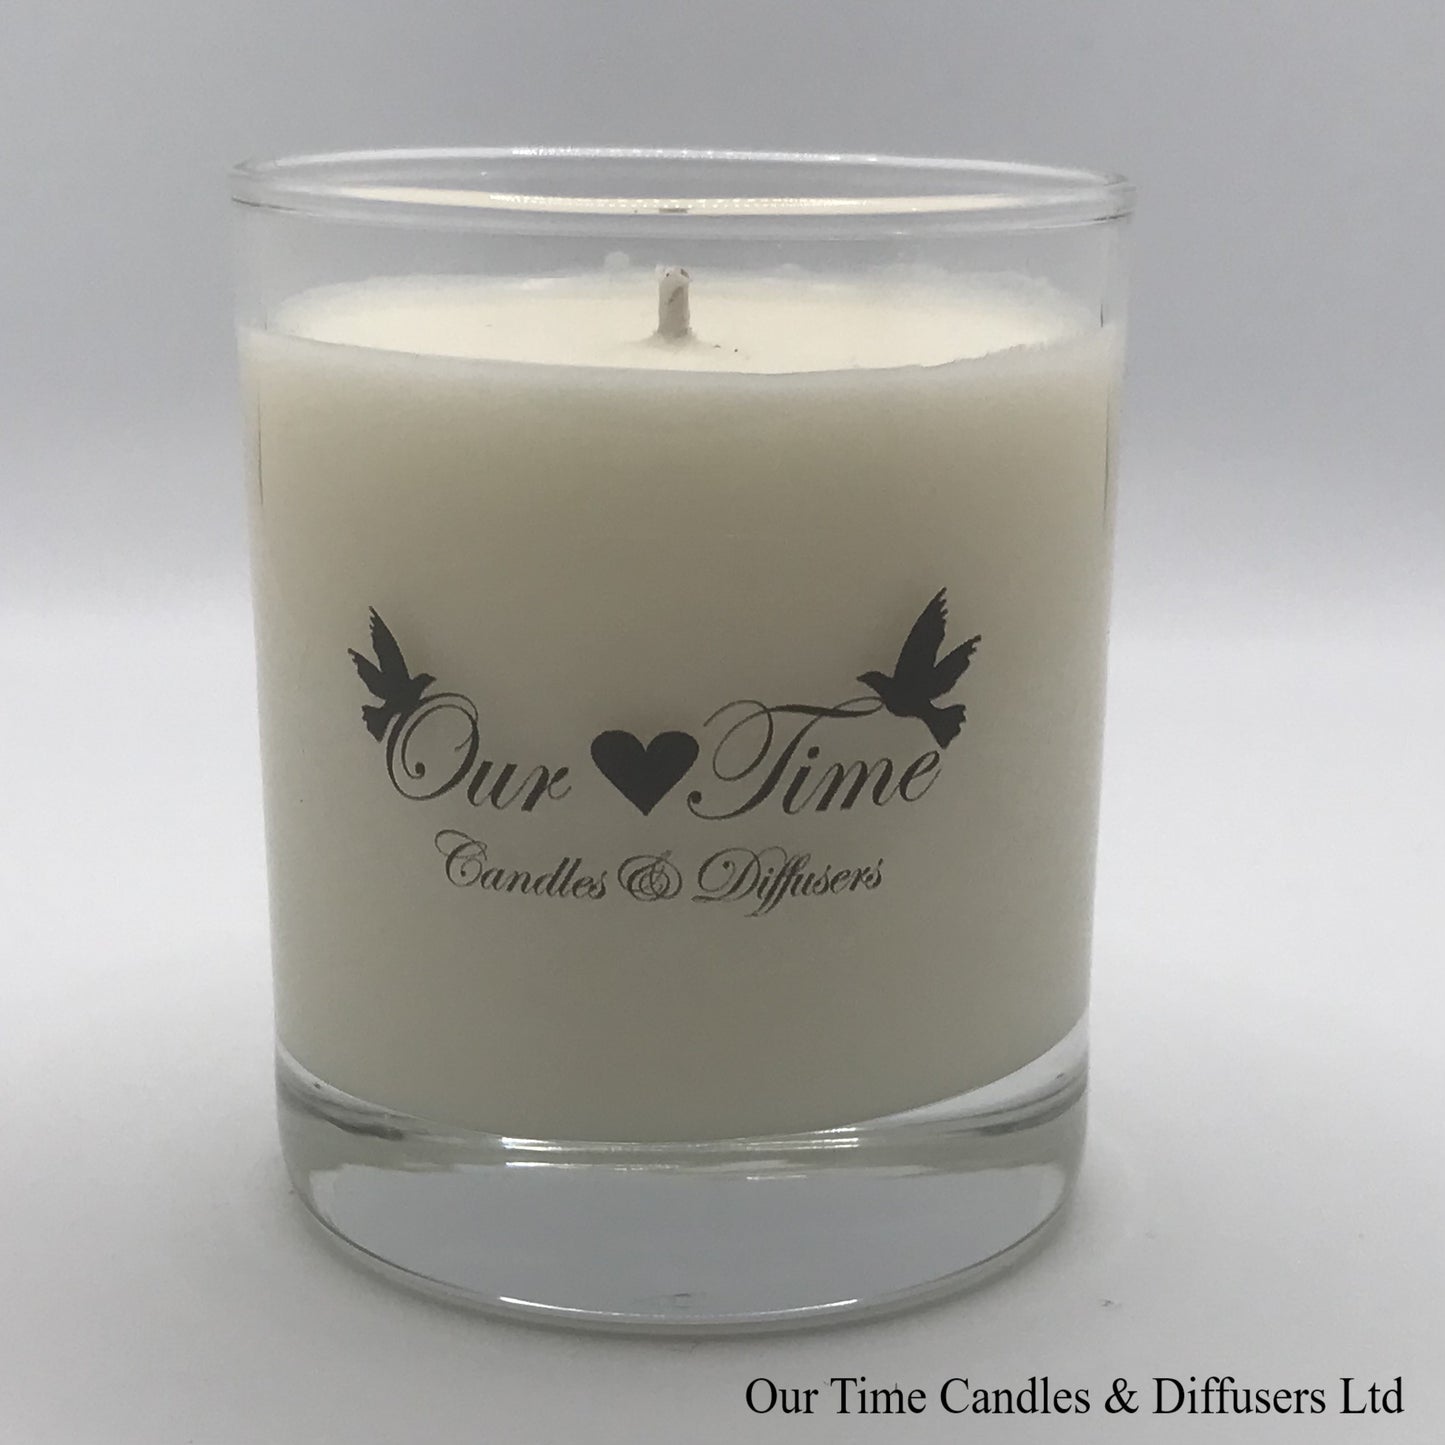 Walks in the Sun scented wax filled candle